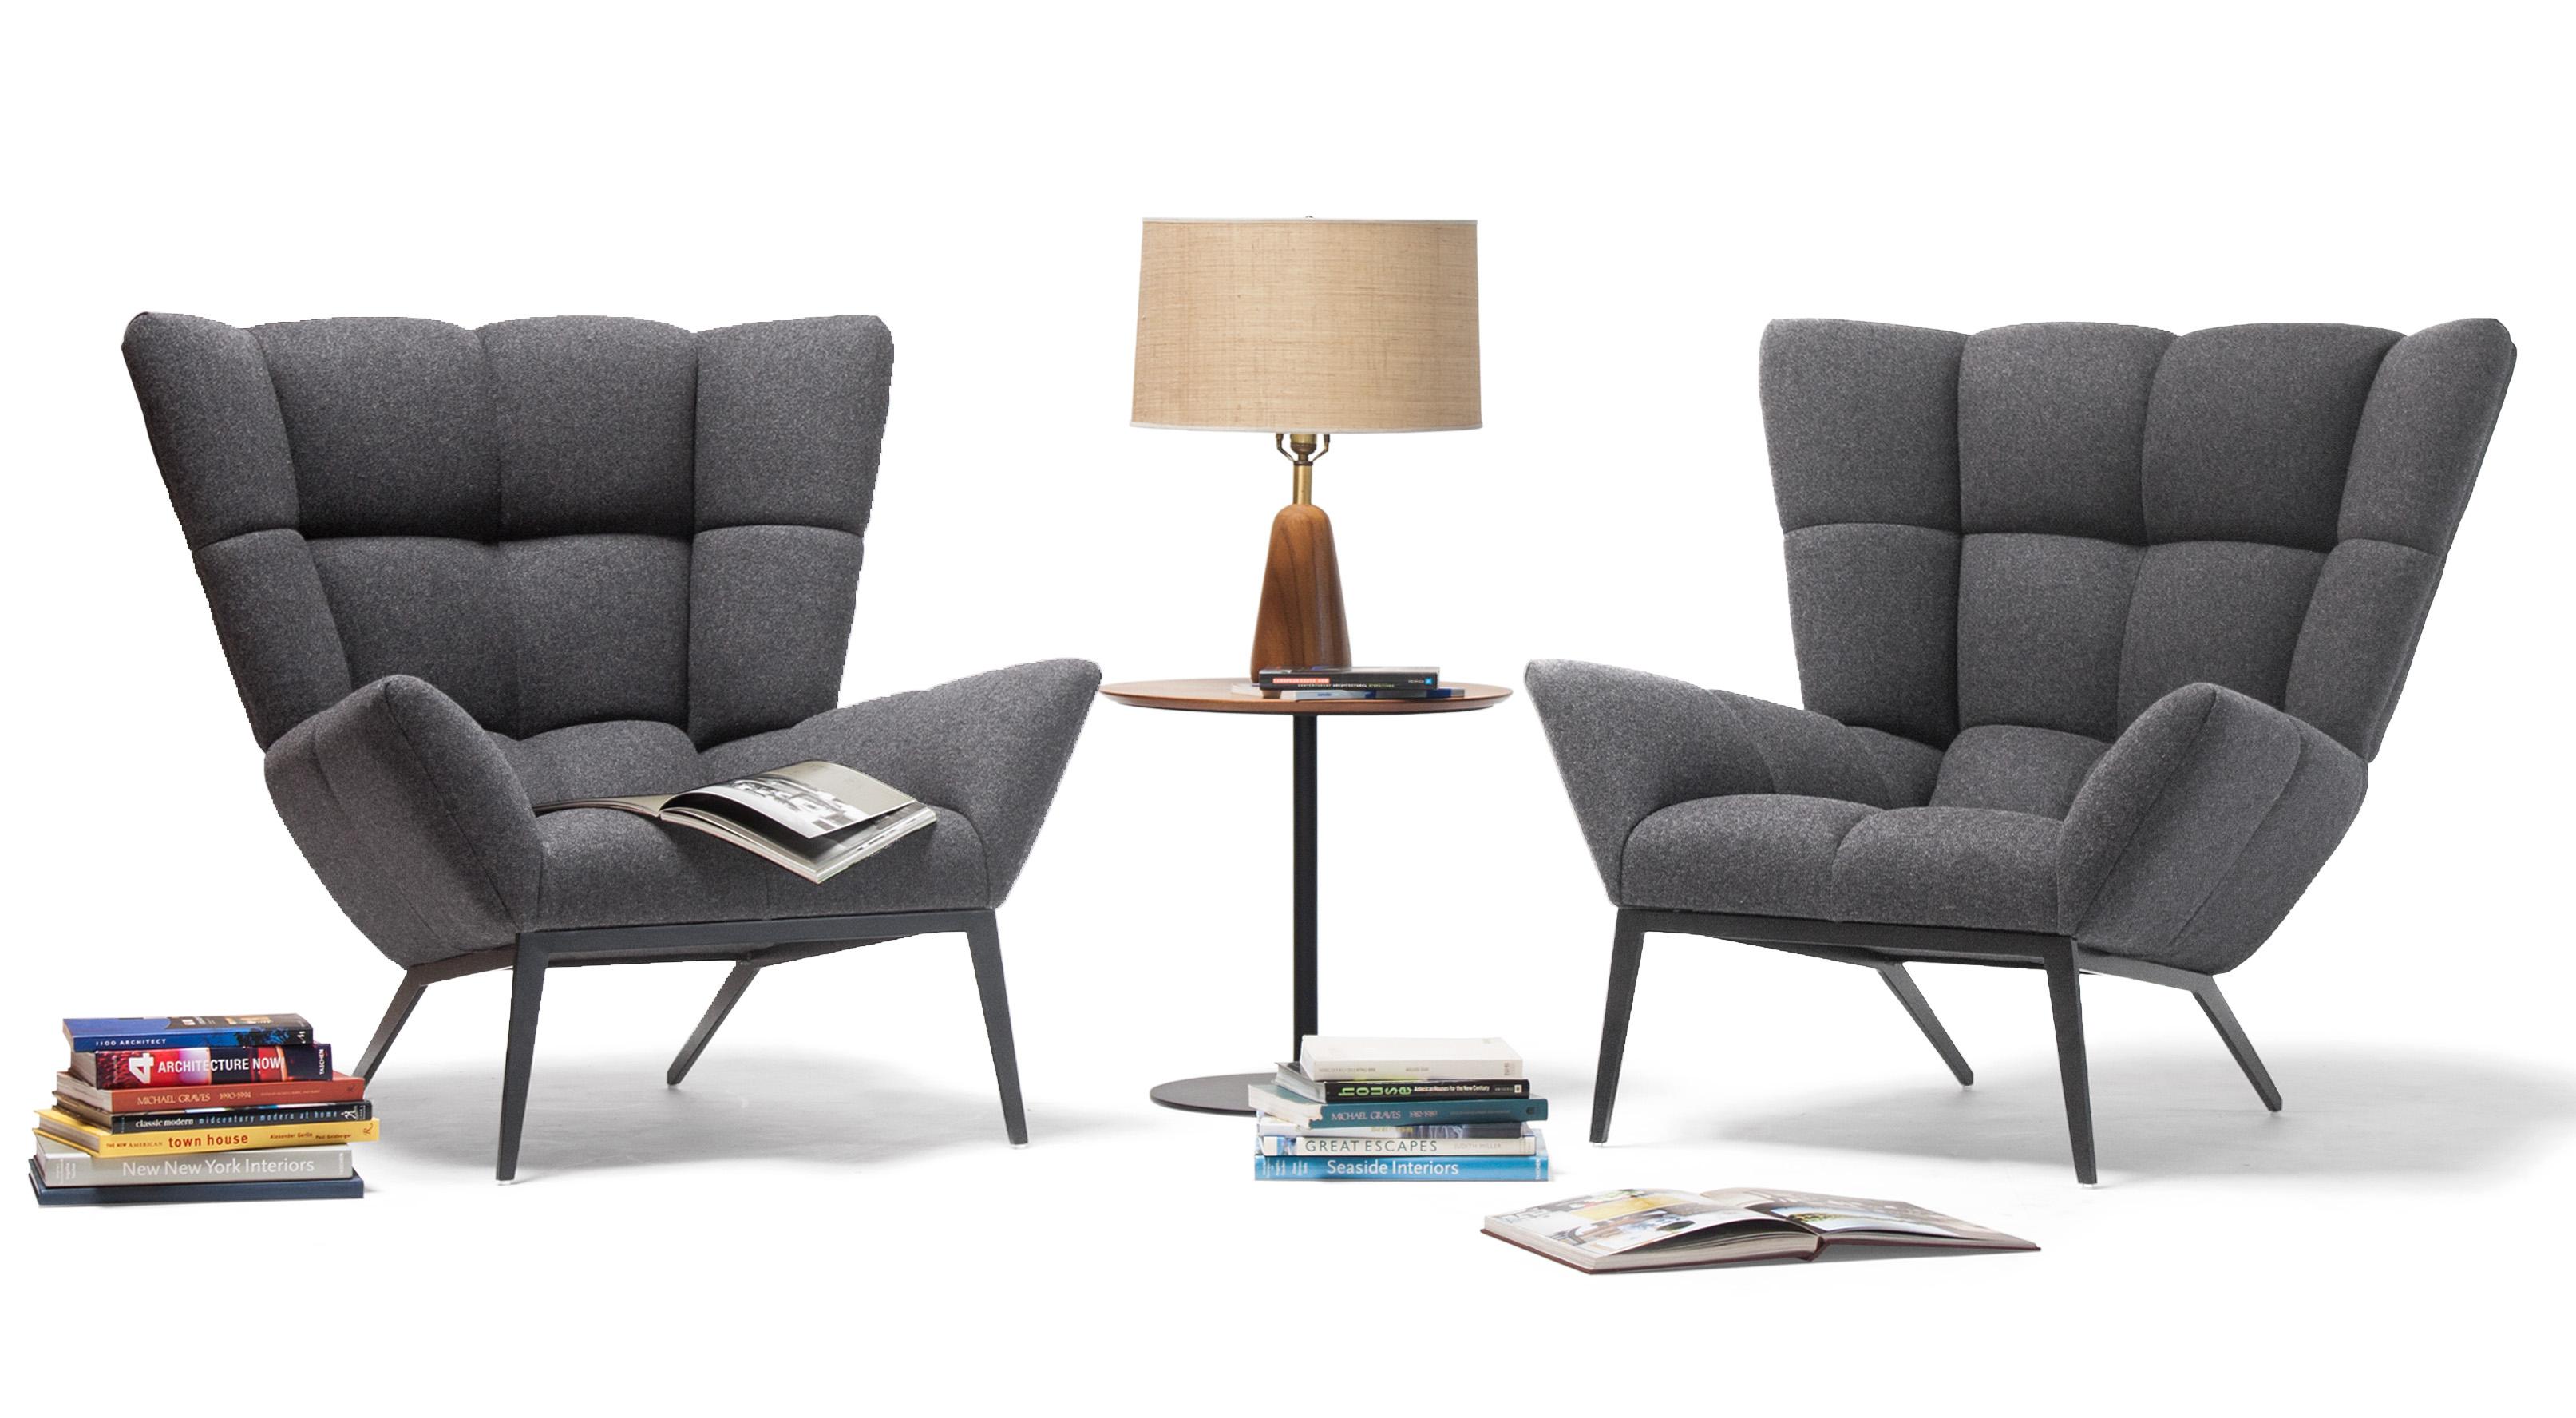 The Tuulla Chair takes the idea of tufting to a new level of comfort for two. The chair is “made” of tufts over an elegant and sophisticated form. With the lean of the piece and the tufted lumbar support, you’ll love this chair for its comfort as